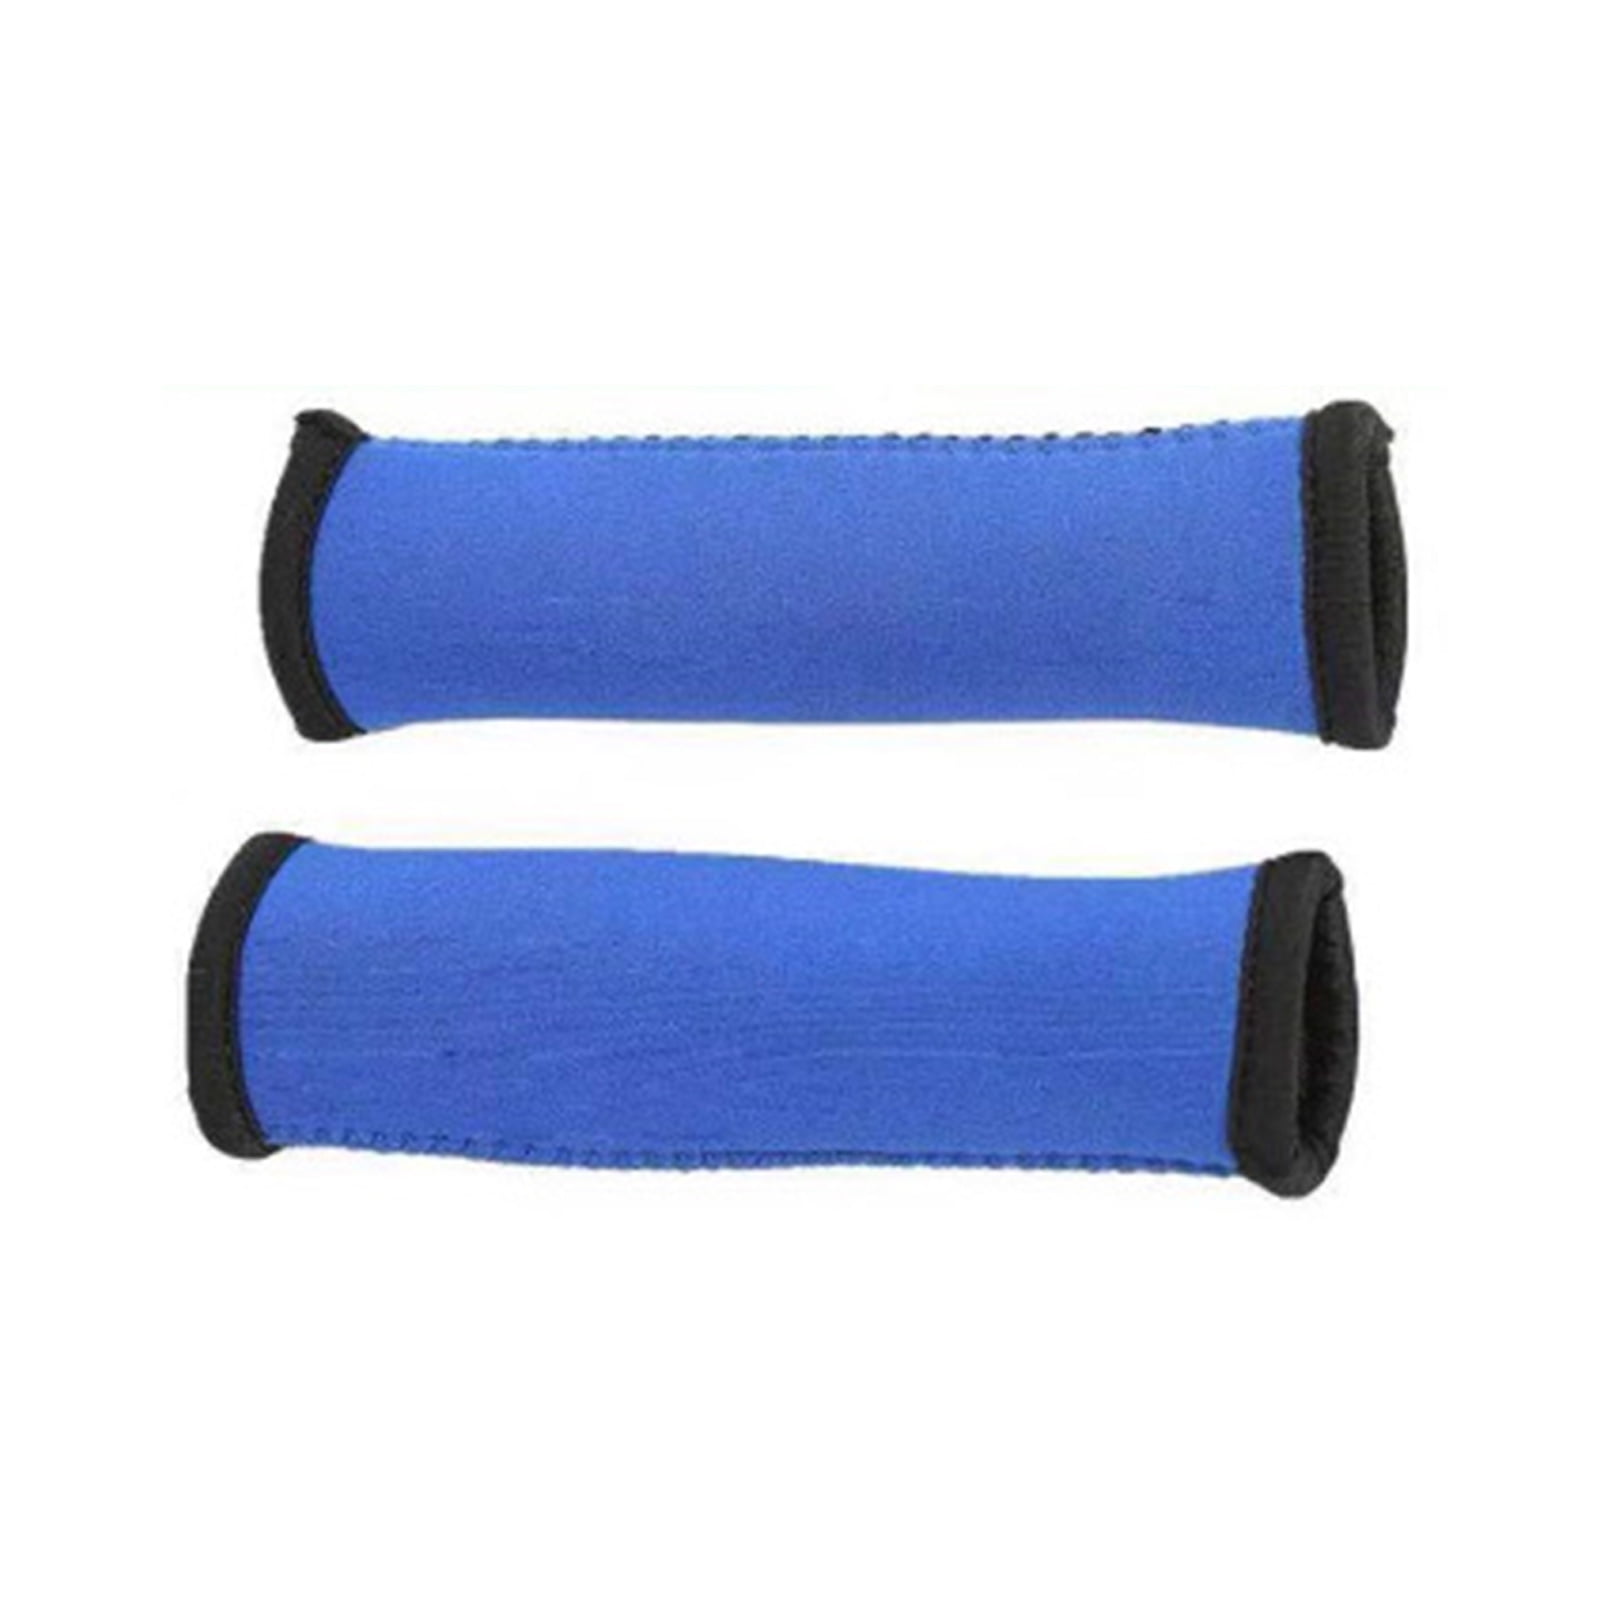 1 Pair Kayak Canoe Boat Paddle Grips Prevent Blisters Calluses Fray Accessories 